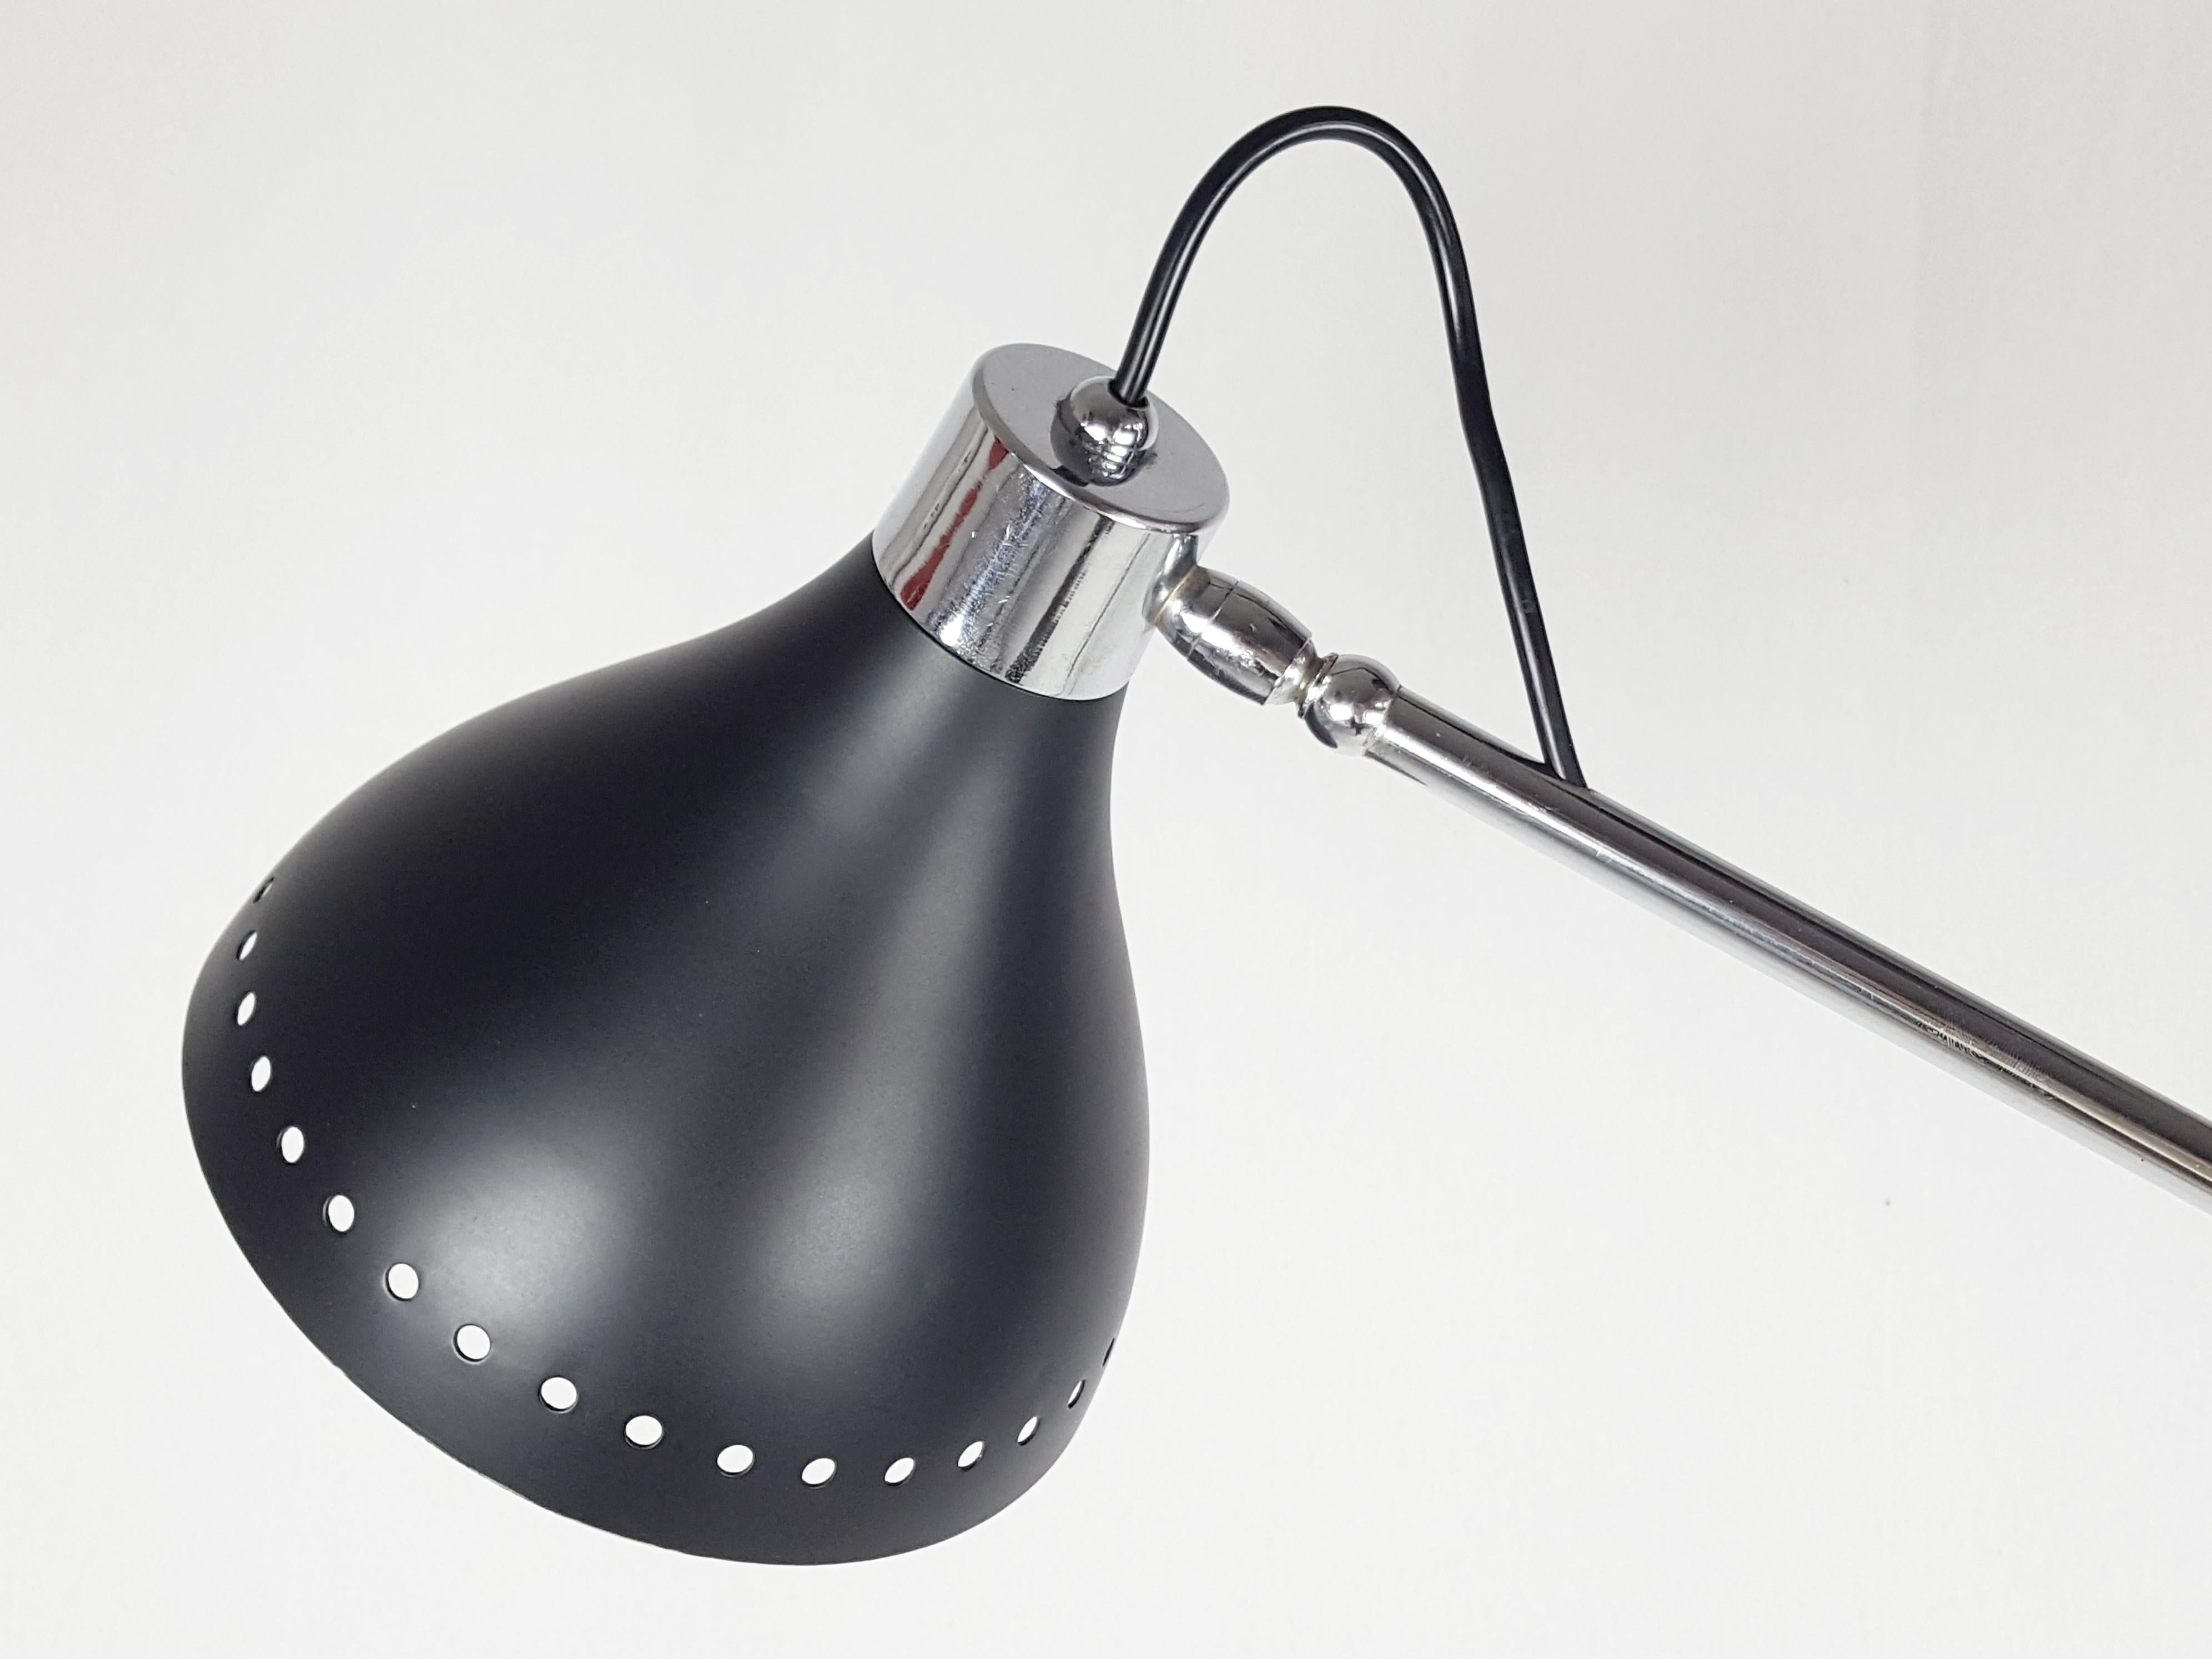 Adjustable floor lamp produced in the early '60s. Black painted metal rod & shades; chrome plated metal arms. Marble base.
Its design resembles the 